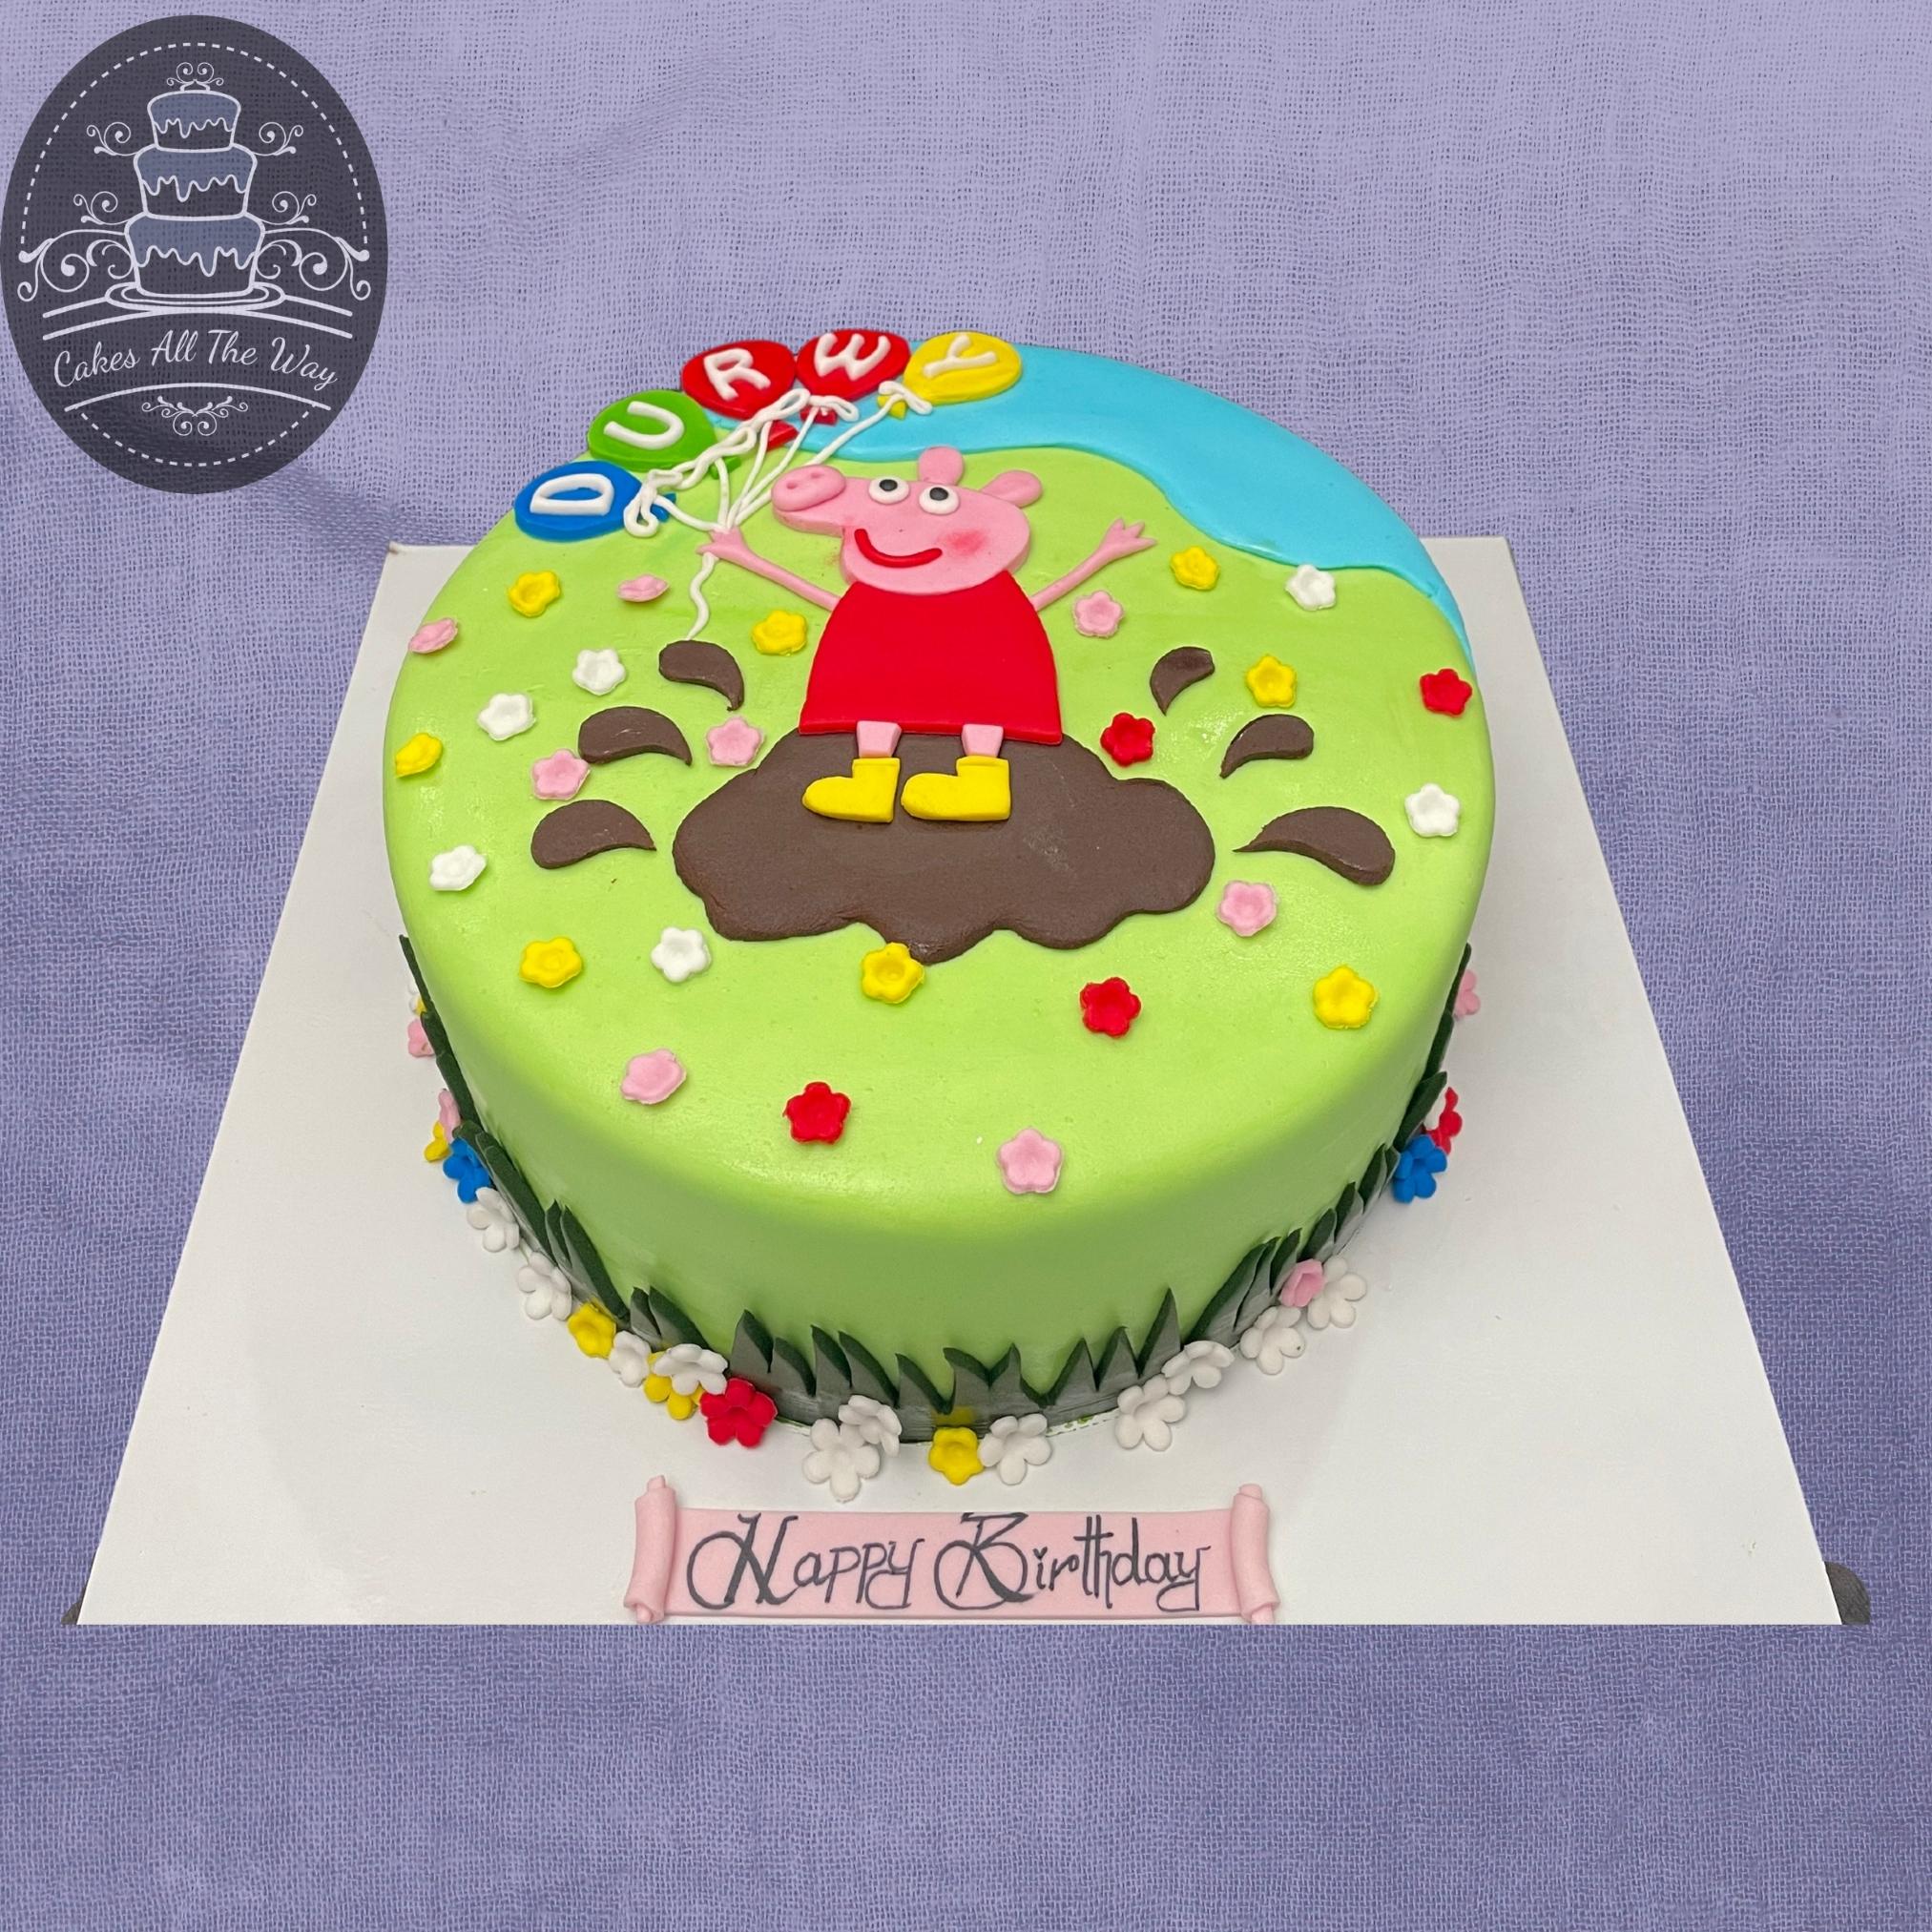 1 KG Adorable Peppa Pig Cake, Super Cake- Online Cake delivery in Noida,  Cake Shops with Midnight & Same Day Delivery